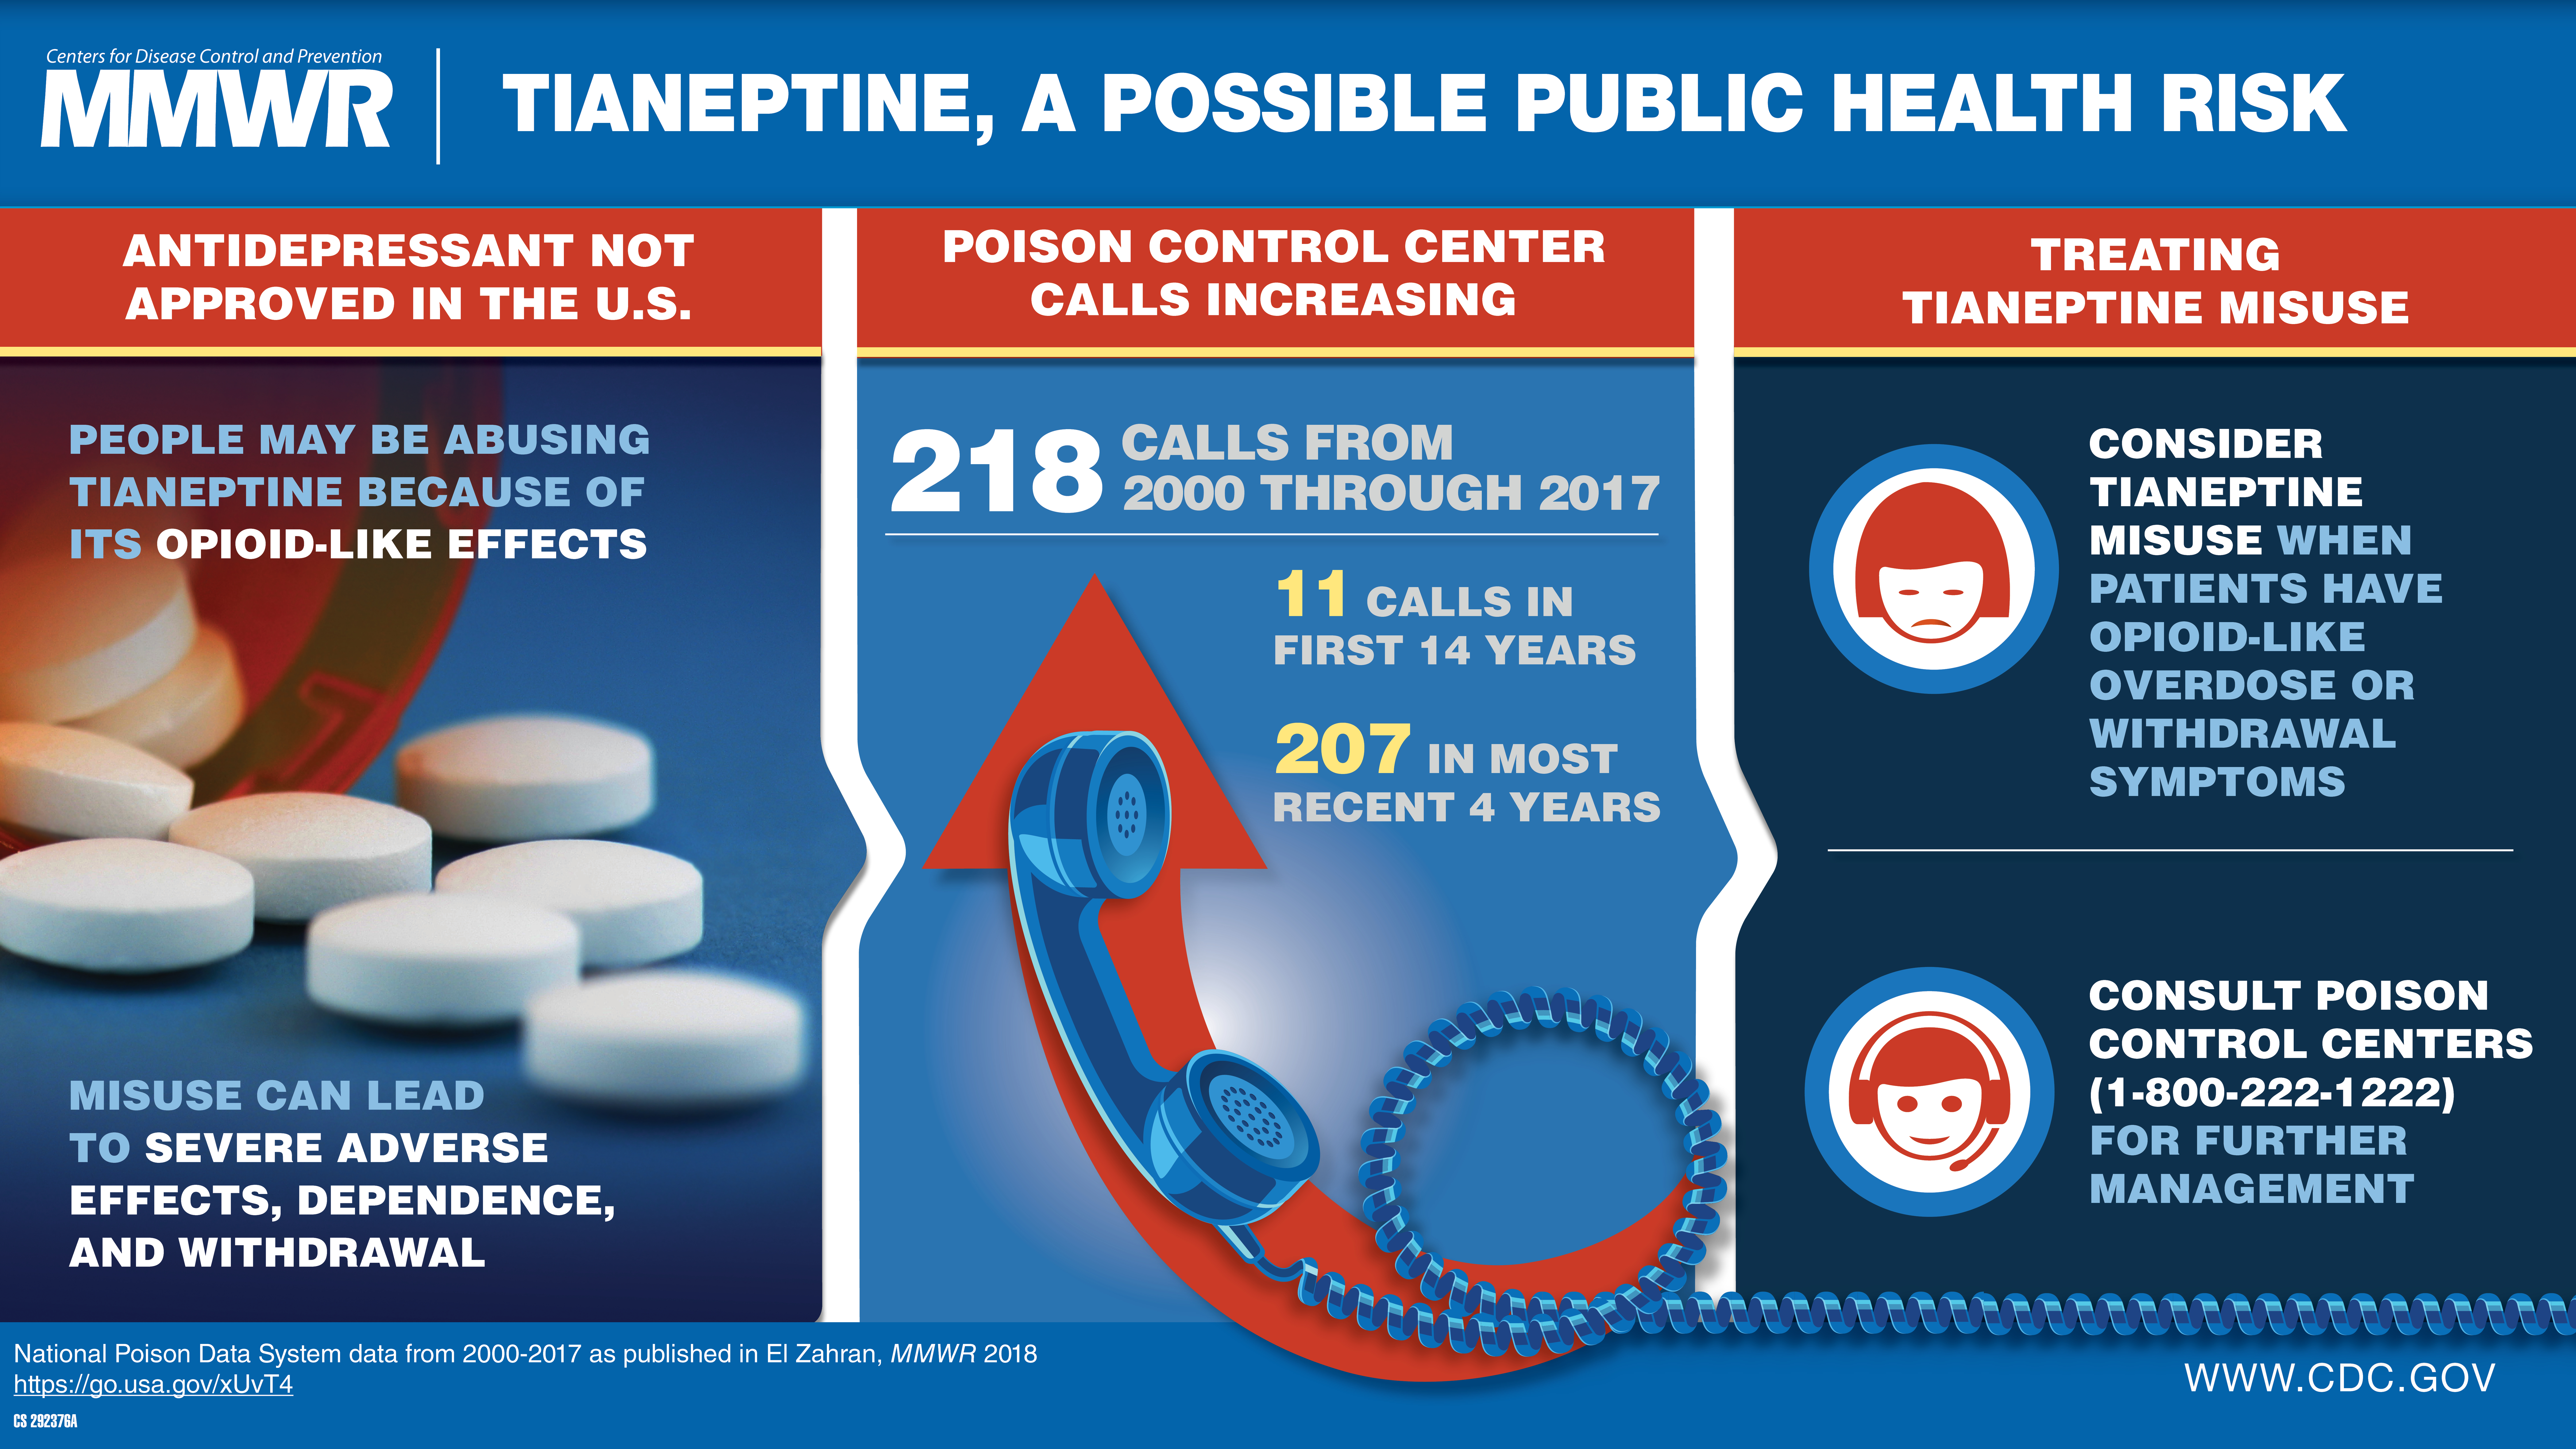 The figure above is a visual abstract that discusses an unapproved antidepressant known as tianeptine that has become an emerging public health risk.